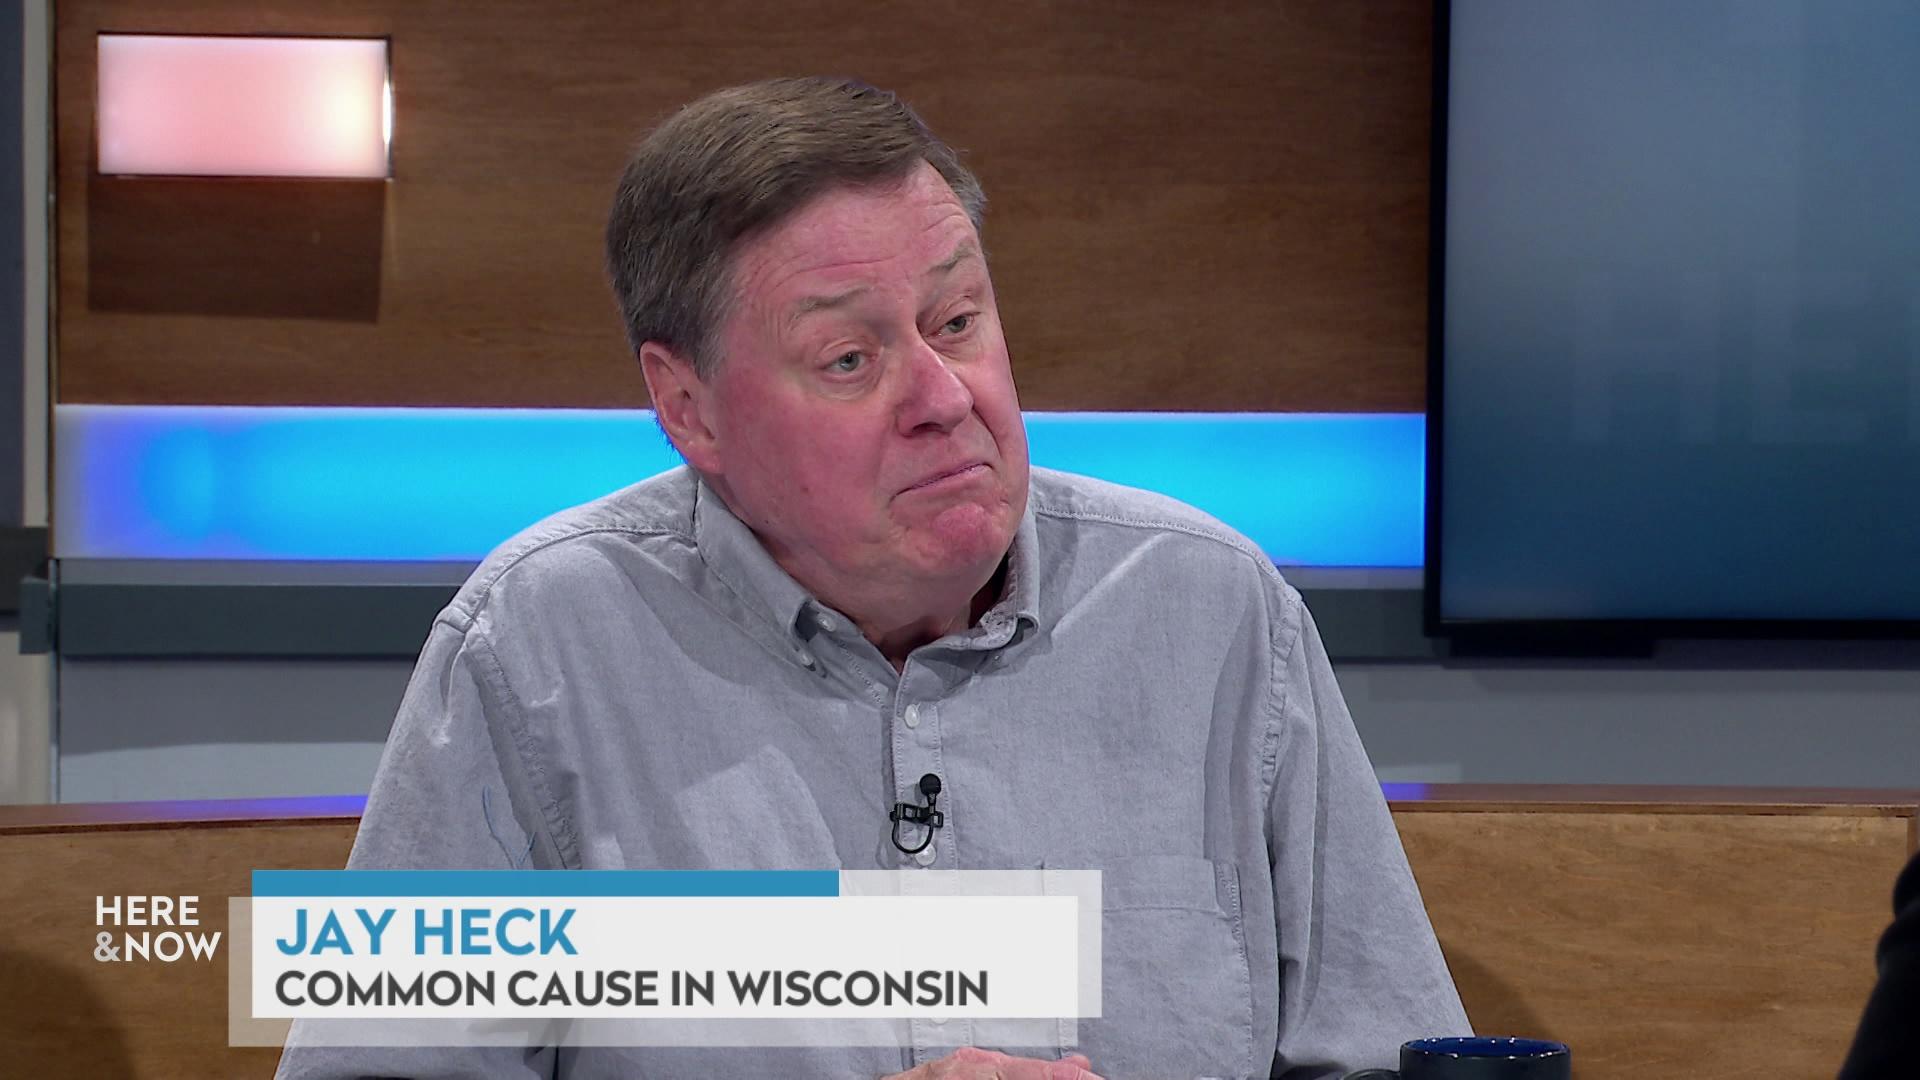 A still image shows Jay Heck seated at the 'Here & Now' set featuring wood paneling, with a graphic at bottom reading 'Jay Heck' and 'Common Cause in Wisconsin.'